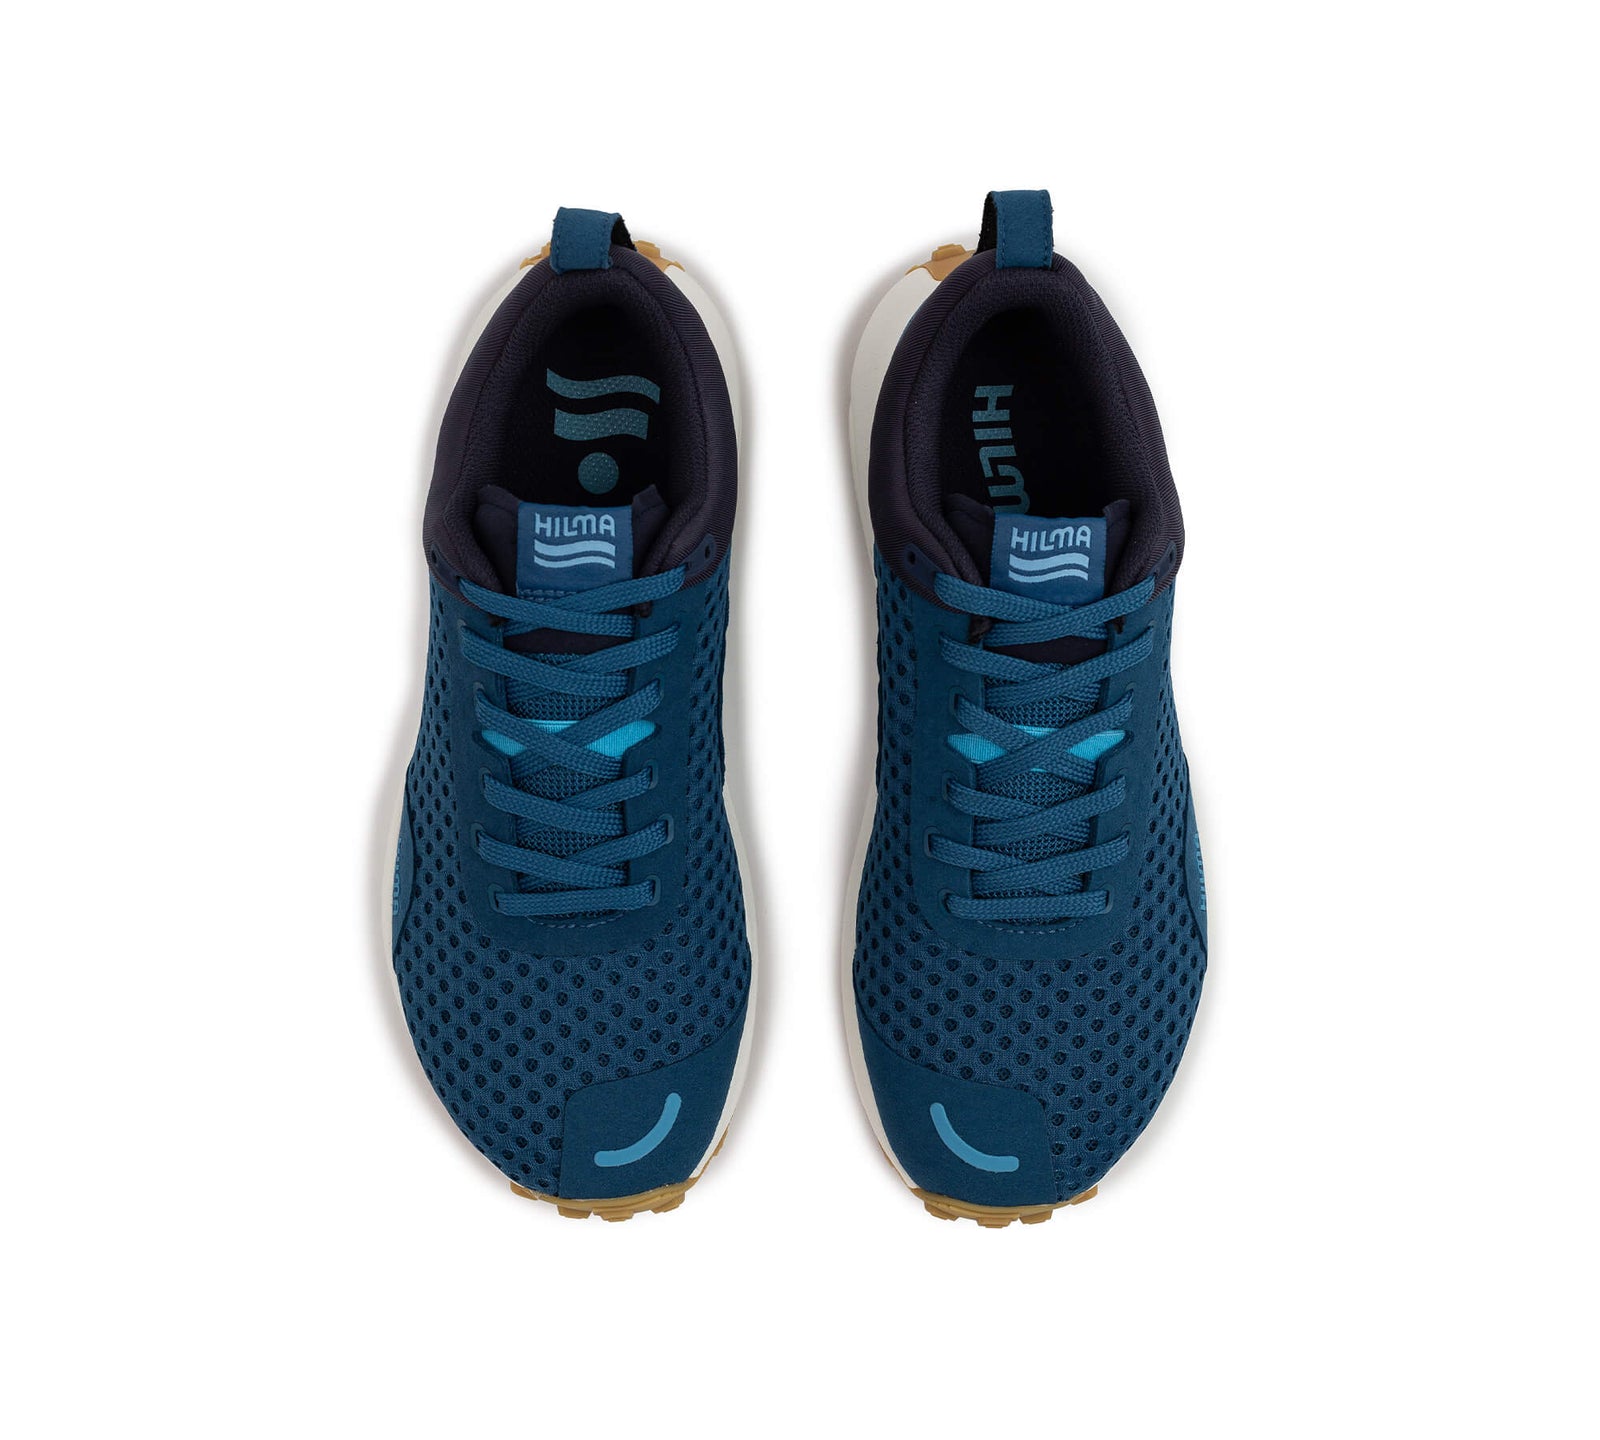 Top down view of a pair of the Everywhere Hilma Running shoe in Stellar Blue